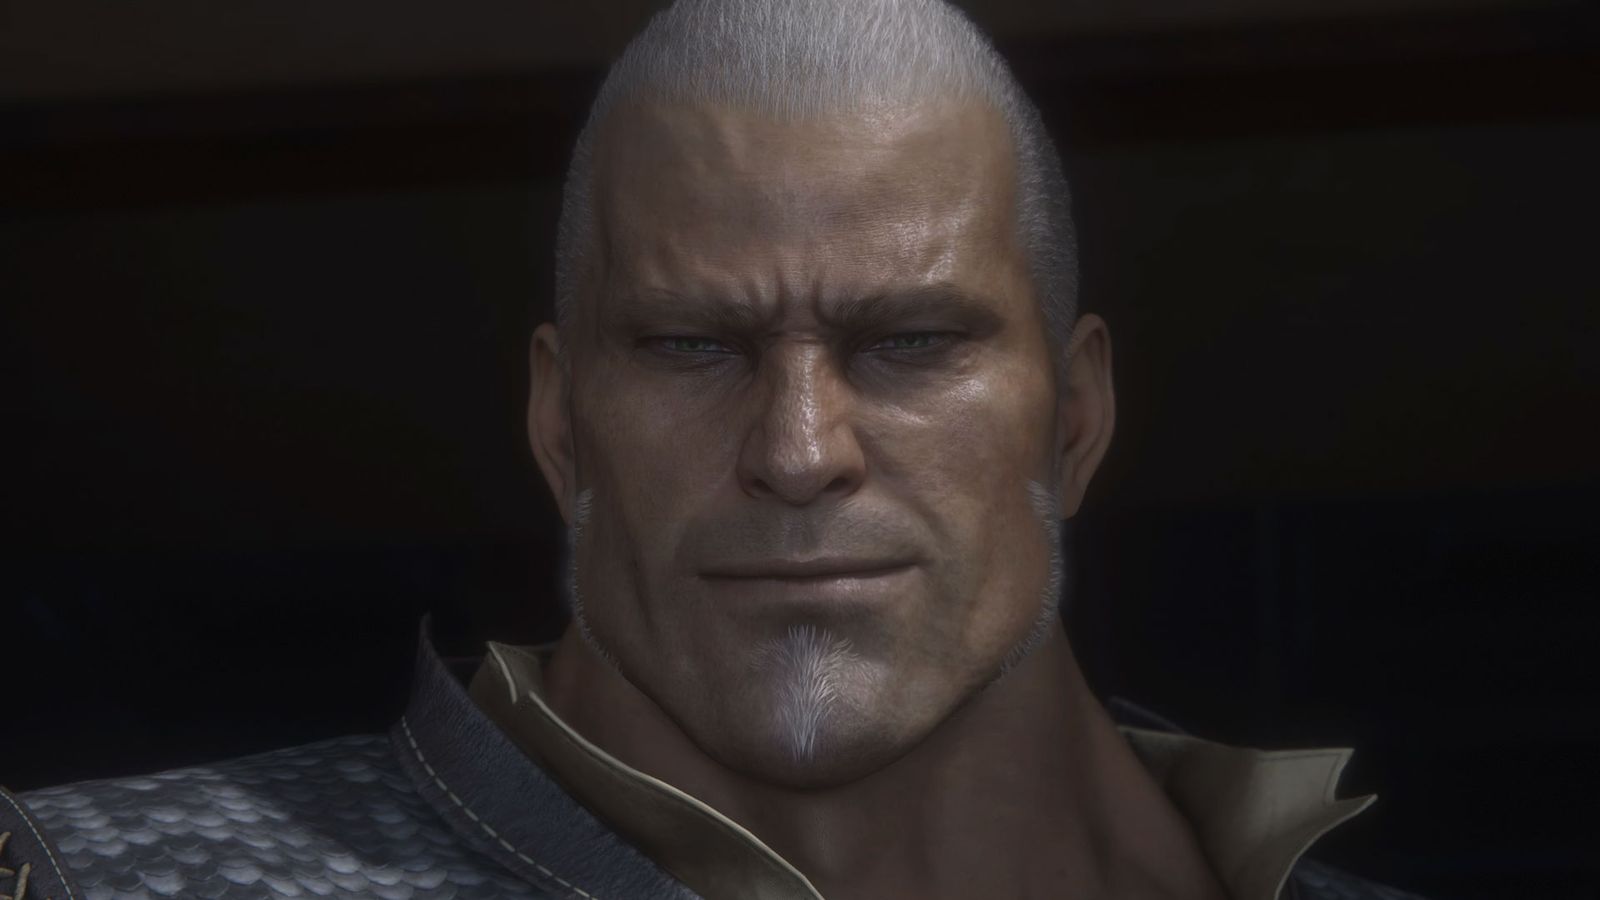 A face you'll see at the Final Fantasy 16 hideaway.